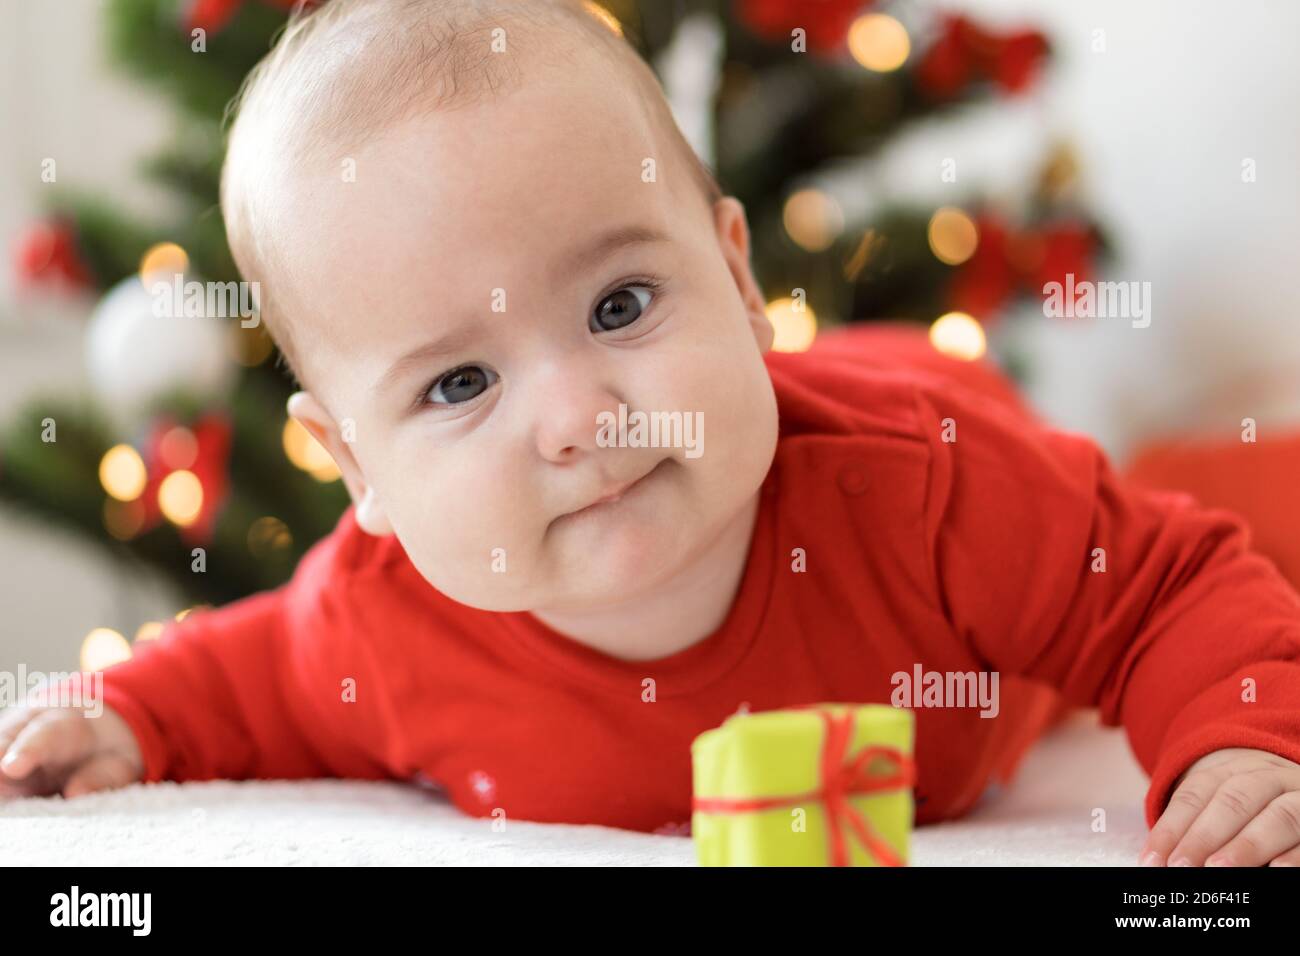 merry christmas christmas and happy new year, infants, childhood, holidays concept - close-up 6 month old newborn baby in red clothers on his tummy Stock Photo